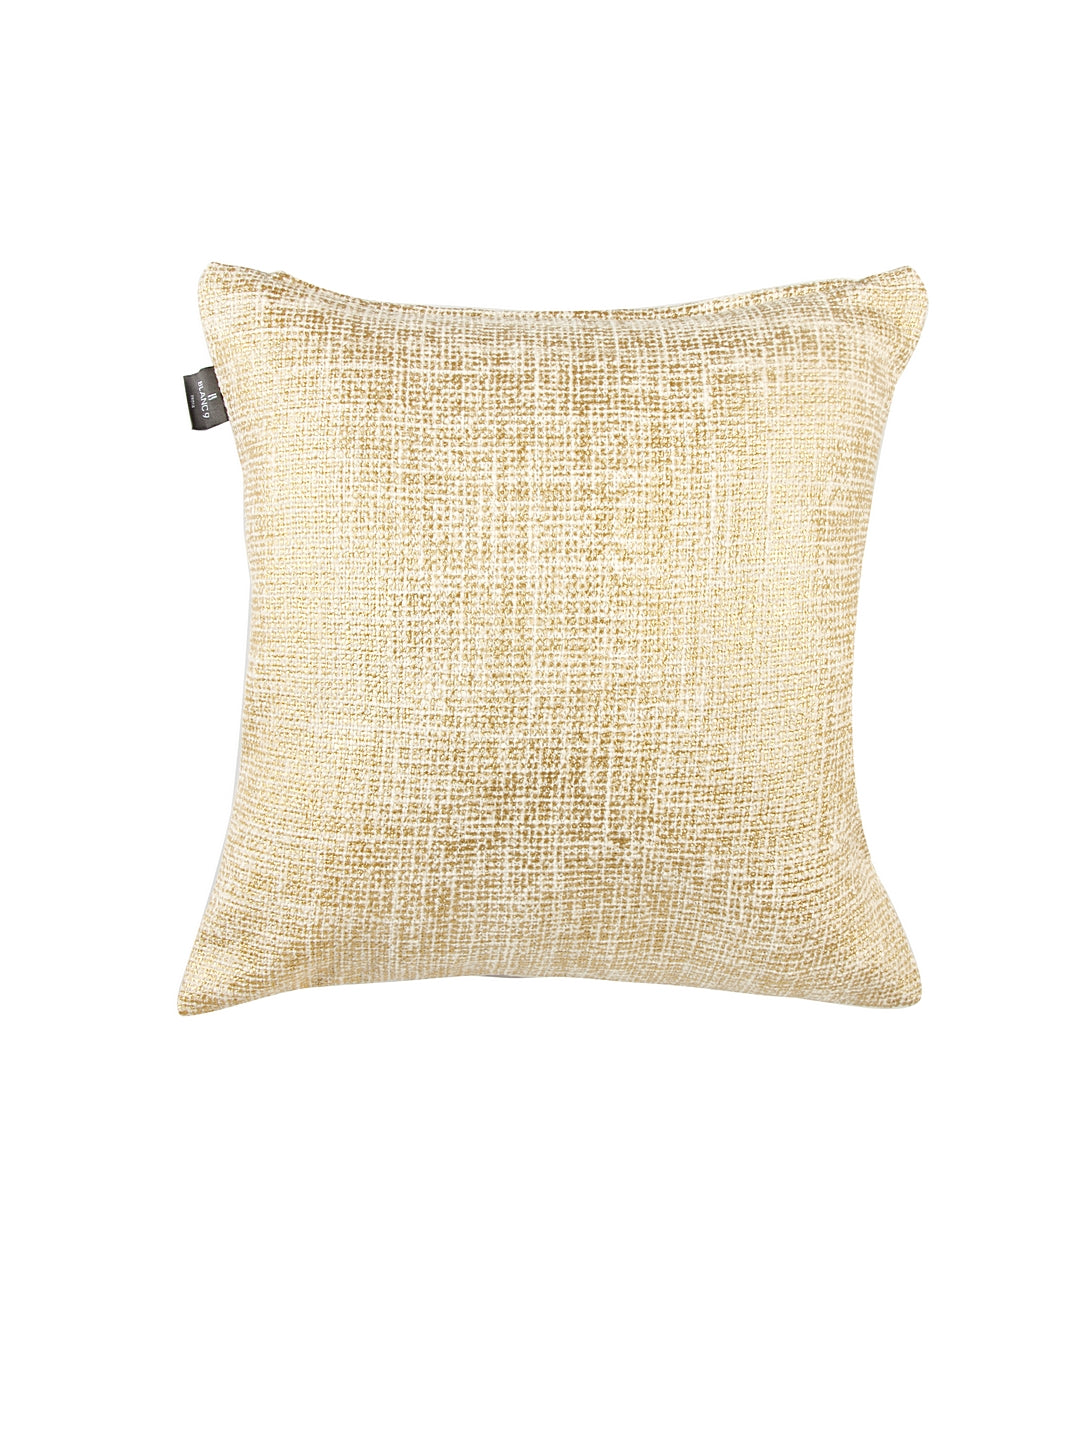 Blanc9 Set of 5 Serene Leaf Hand Embroidery with Ecru & Bling Gold Foil 40x40 CM Cushion Covers